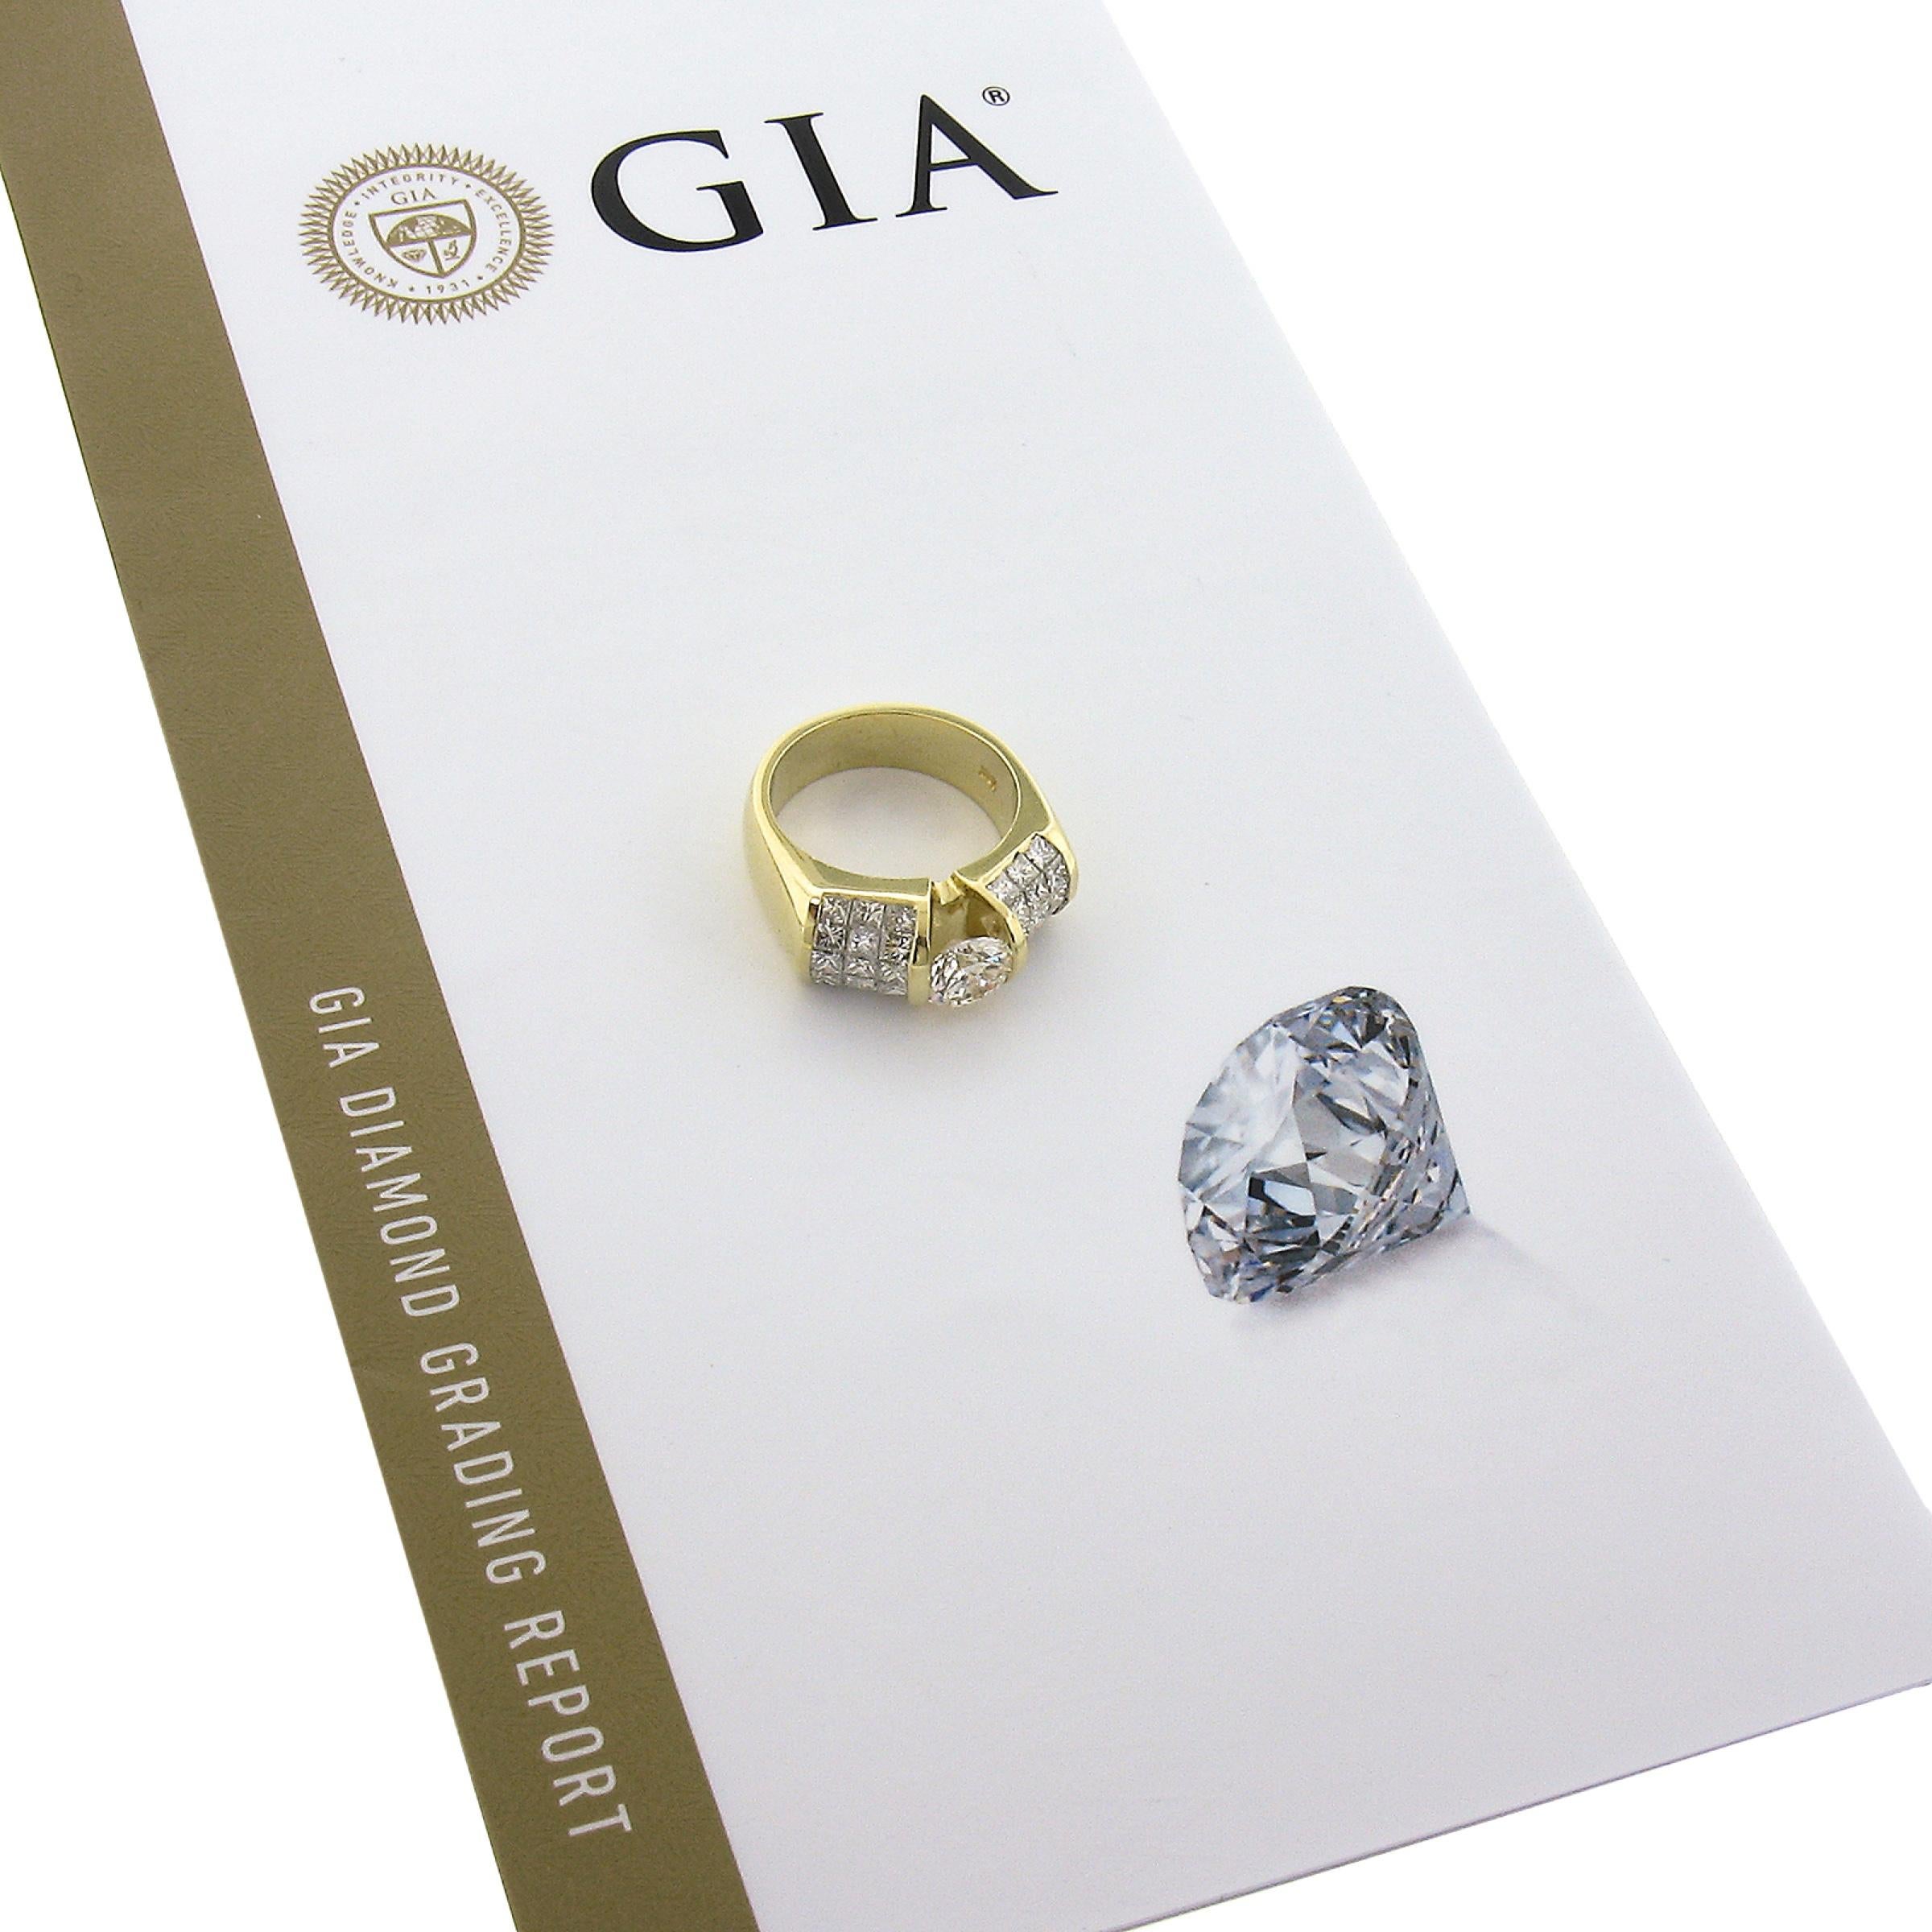 This bold and super brilliant diamond ring is solidly crafted in 18k yellow gold and features a fine quality, GIA certified, 1.02 carat round brilliant cut diamond that beautifully floats at the center of the design. The shoulders are set via